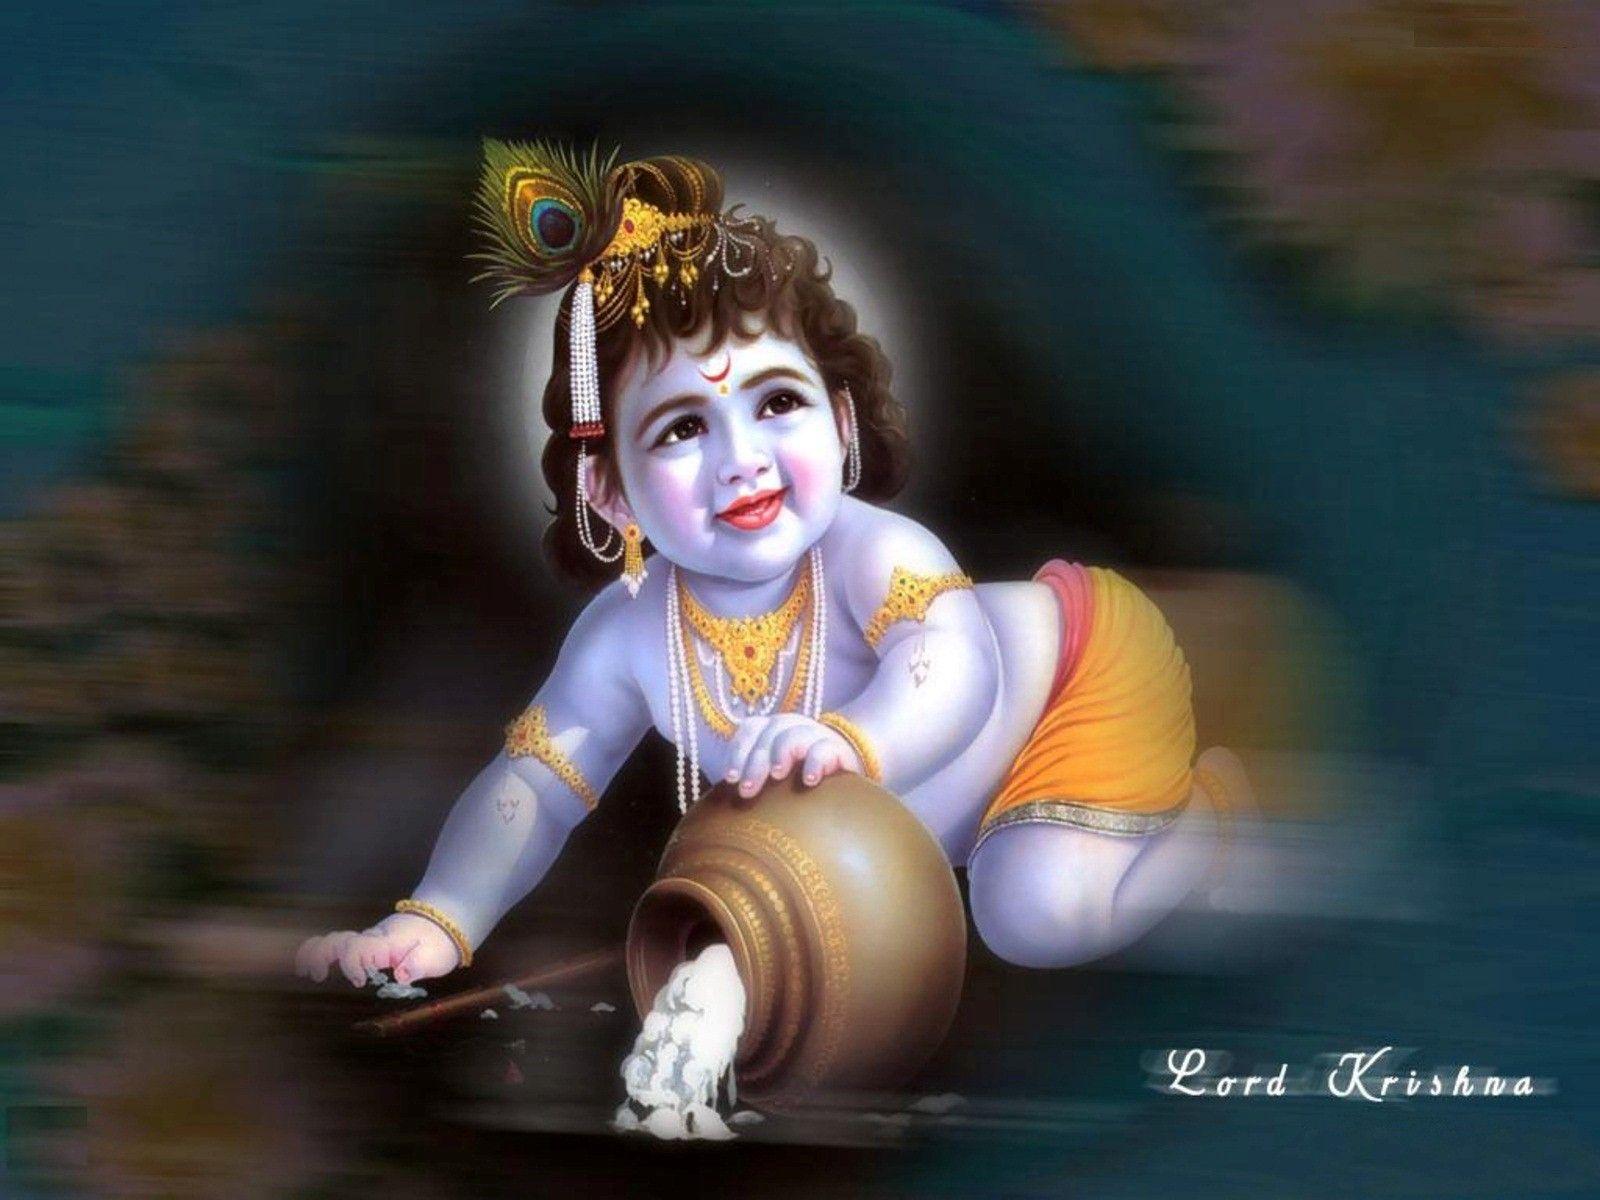 high definition 1280x720 baby krishna pic Search